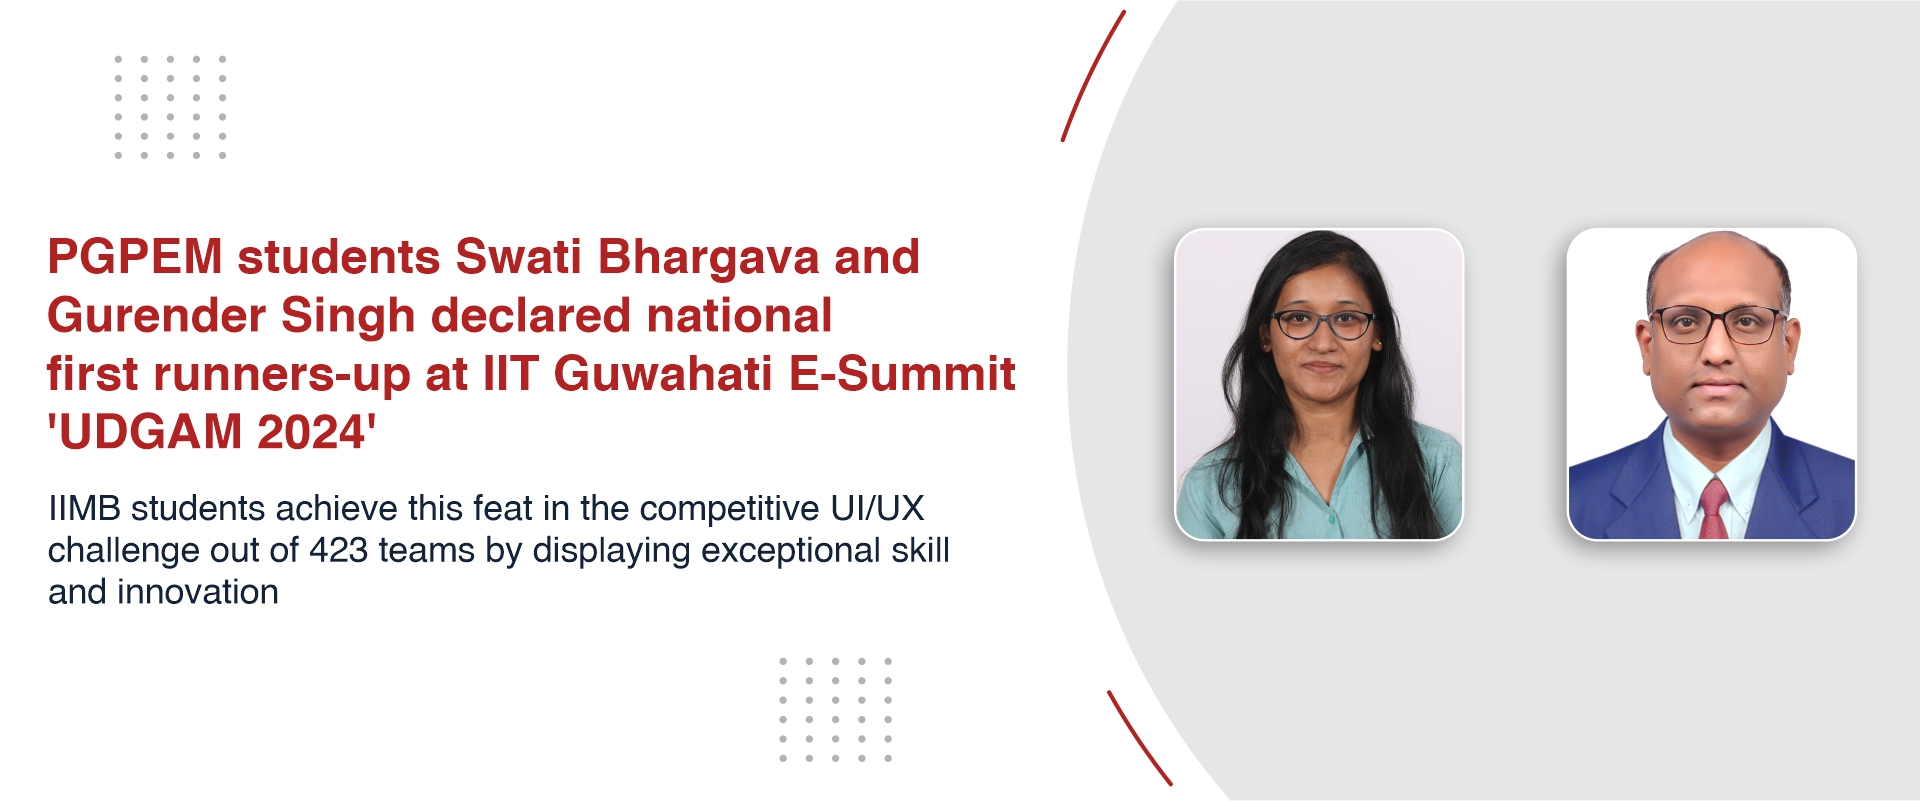 PGPEM students Swati Bhargava and Gurender Singh declared national first runners-up at IIT Guwahati E-Summit ‘UDGAM 2024’ 